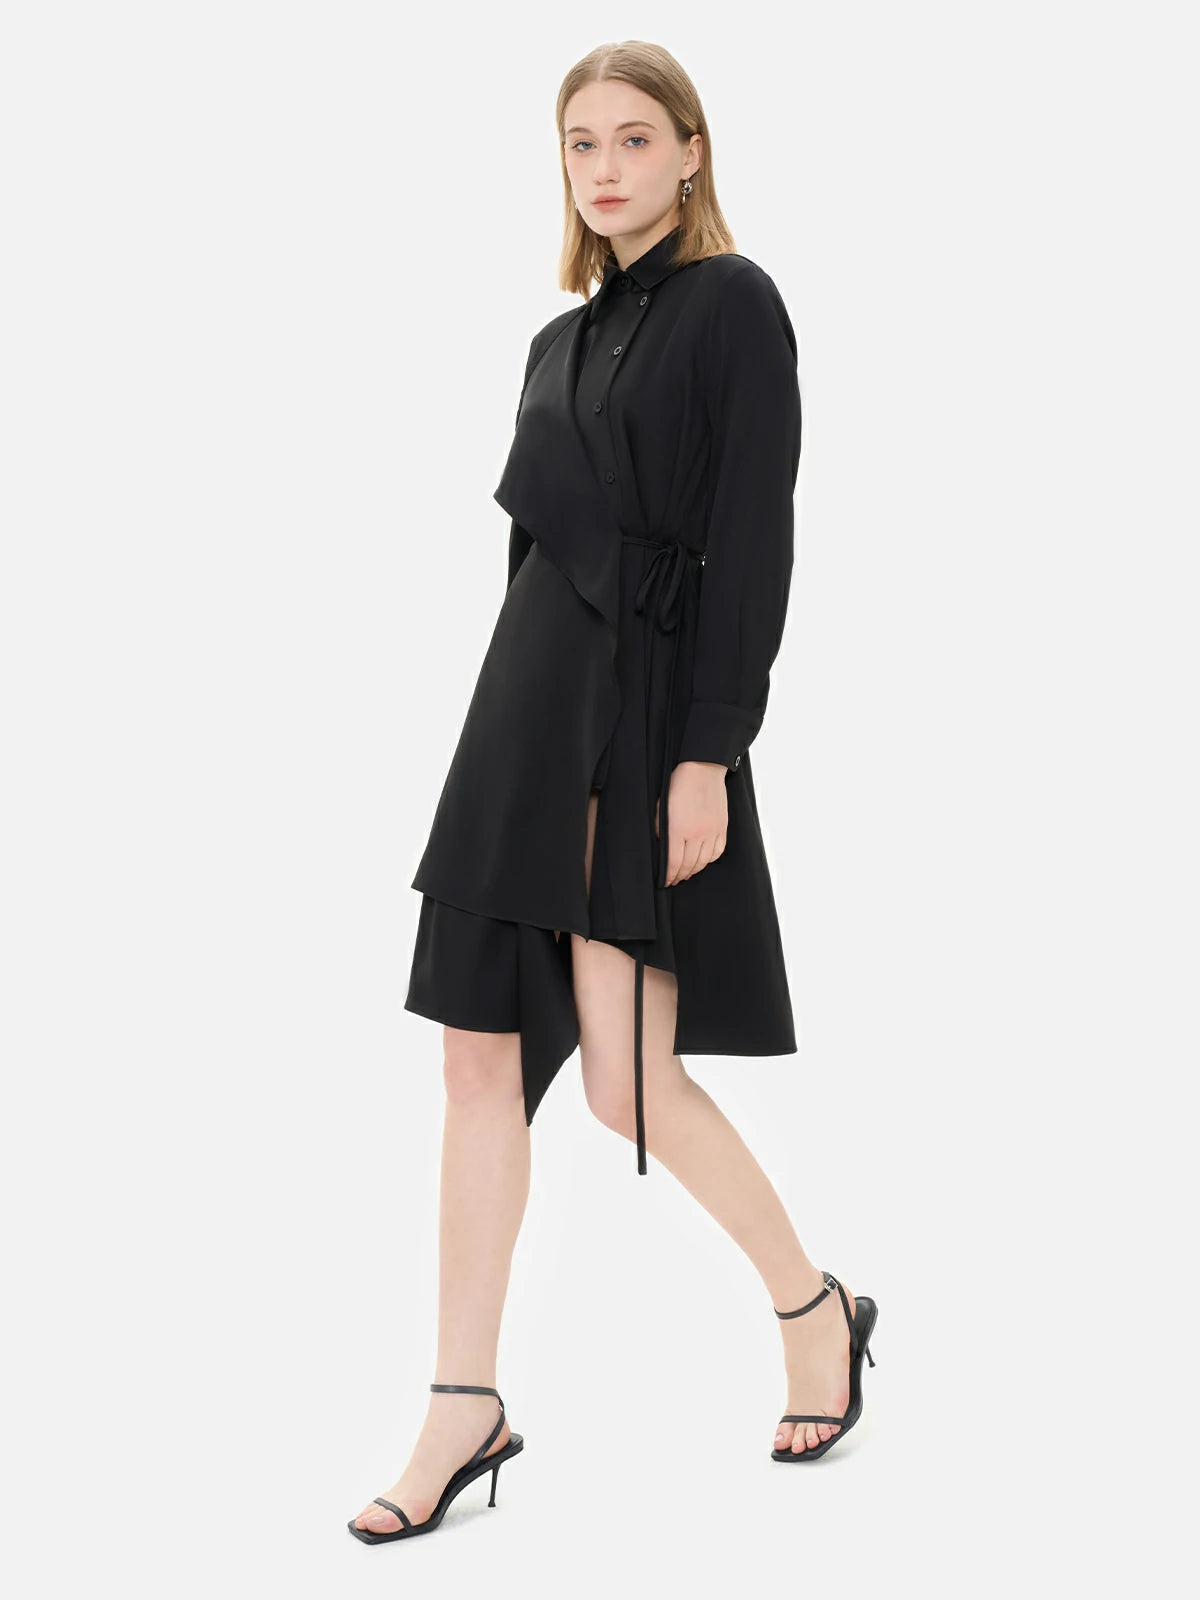 Experience the charm of this versatile black shirt dress, adorned with a waist-tie accent, irregular hem, and front paneling. 